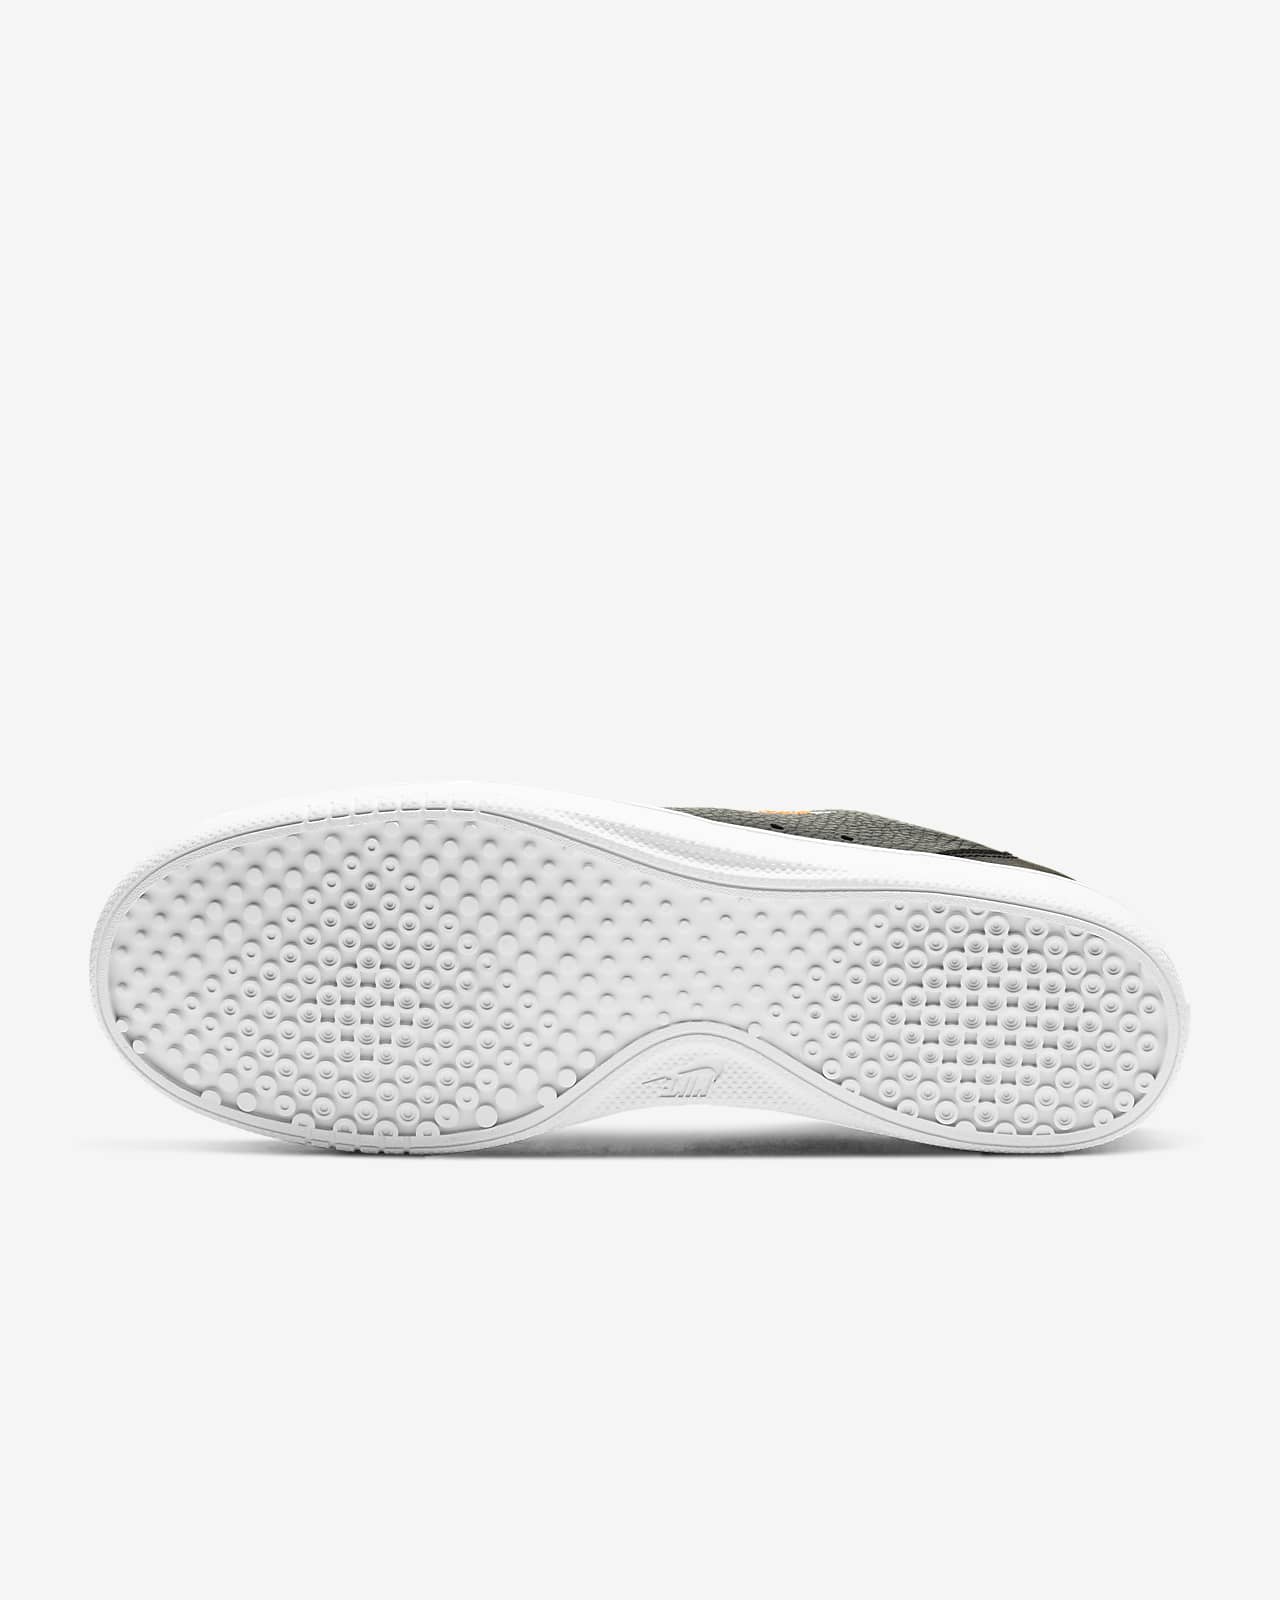 nike casual shoes white colour